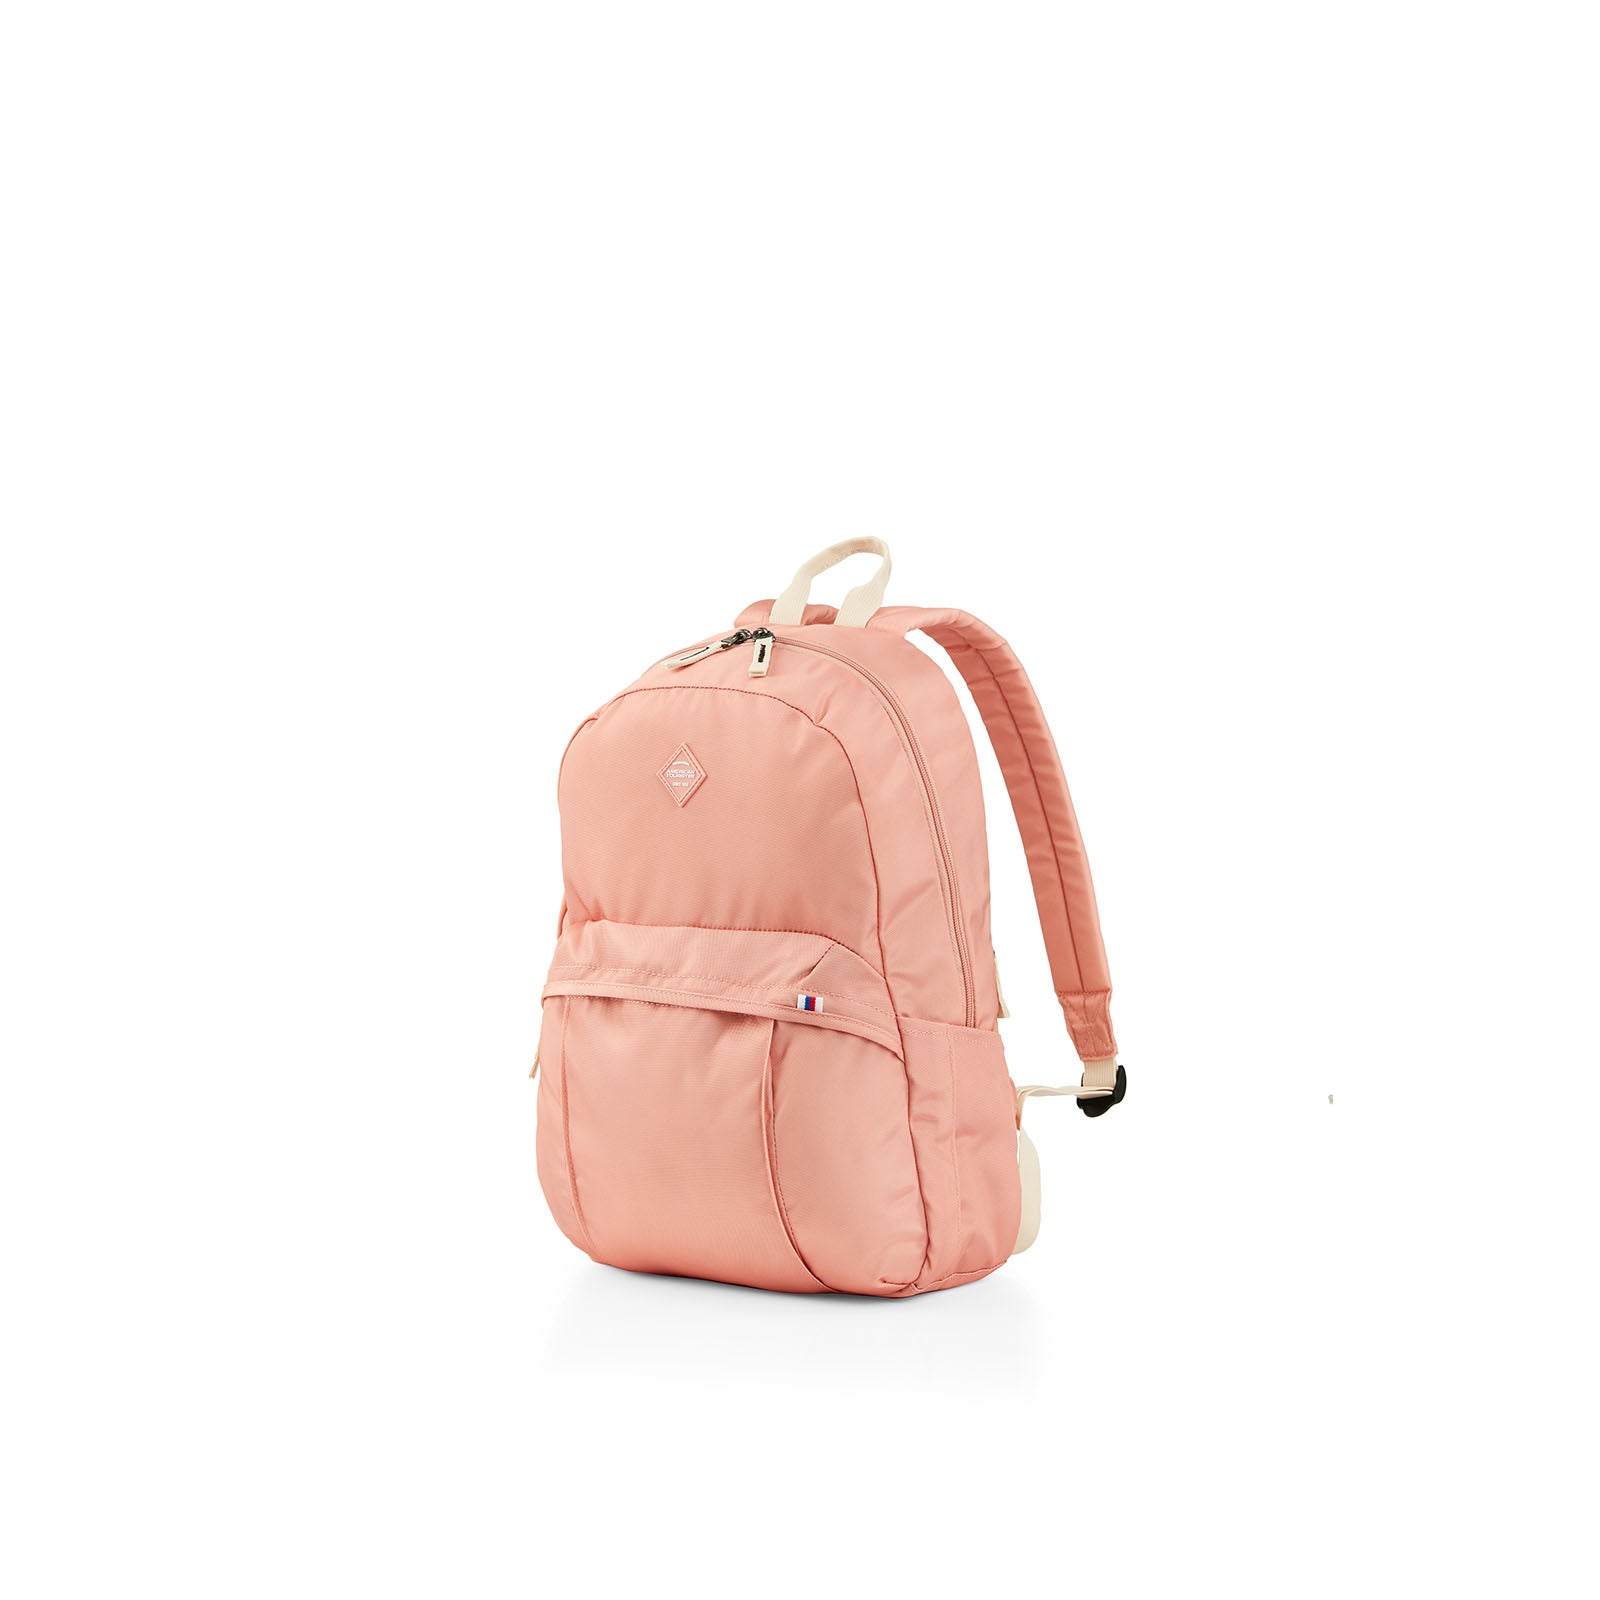 American-Tourister-Rudy-Everyday-Backpack-Apricot-Ice-Front-Angle